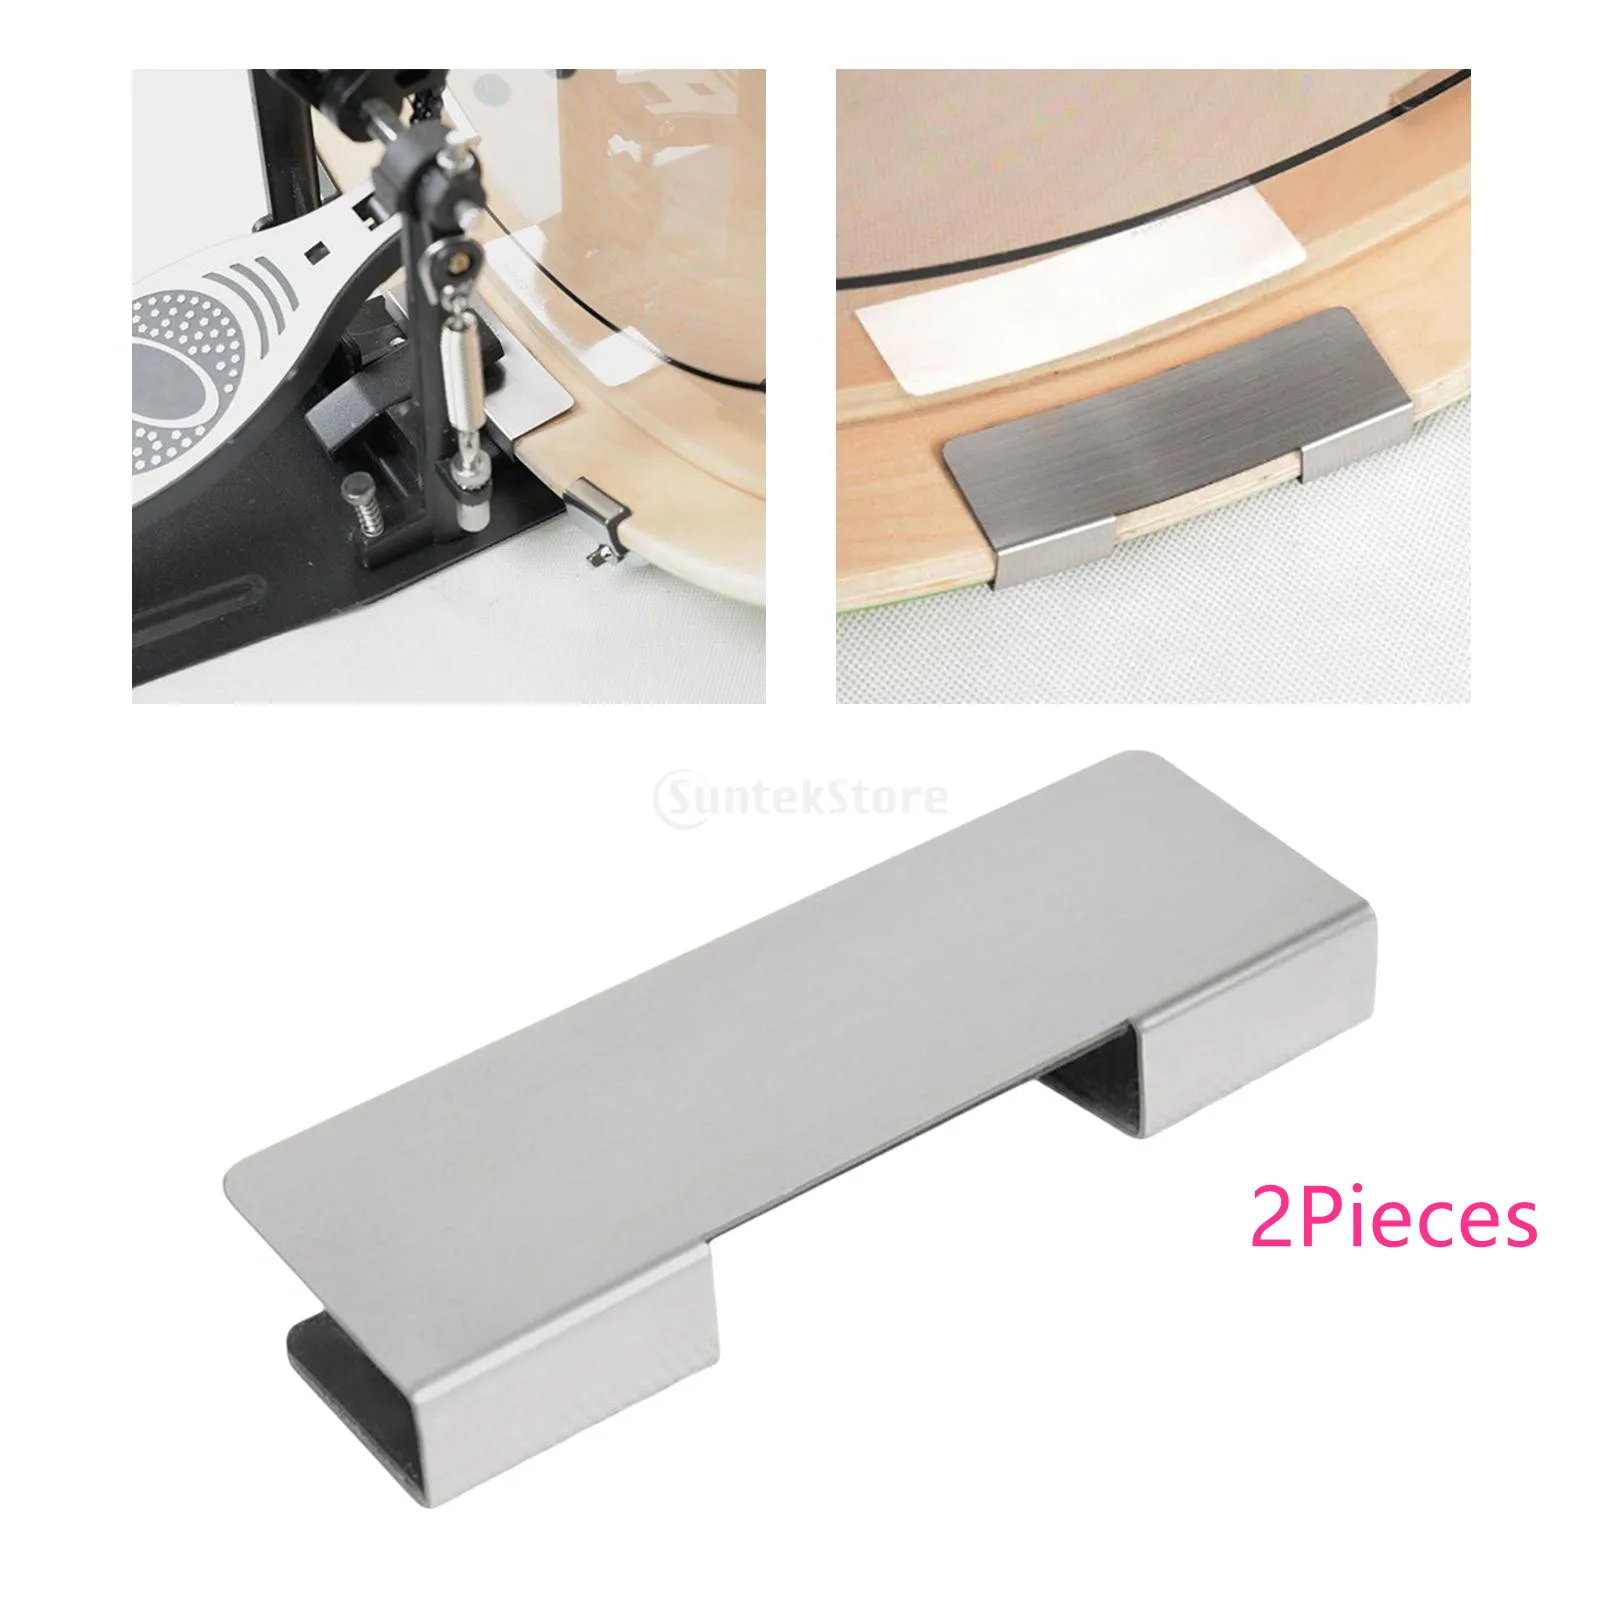 

2Pcs Bass Drum Hoops Protector Stainless Steel Drum Hoop Guard Drum Edges Protection Parts for Bass Drum 10cm x 3cm x 1.3cm